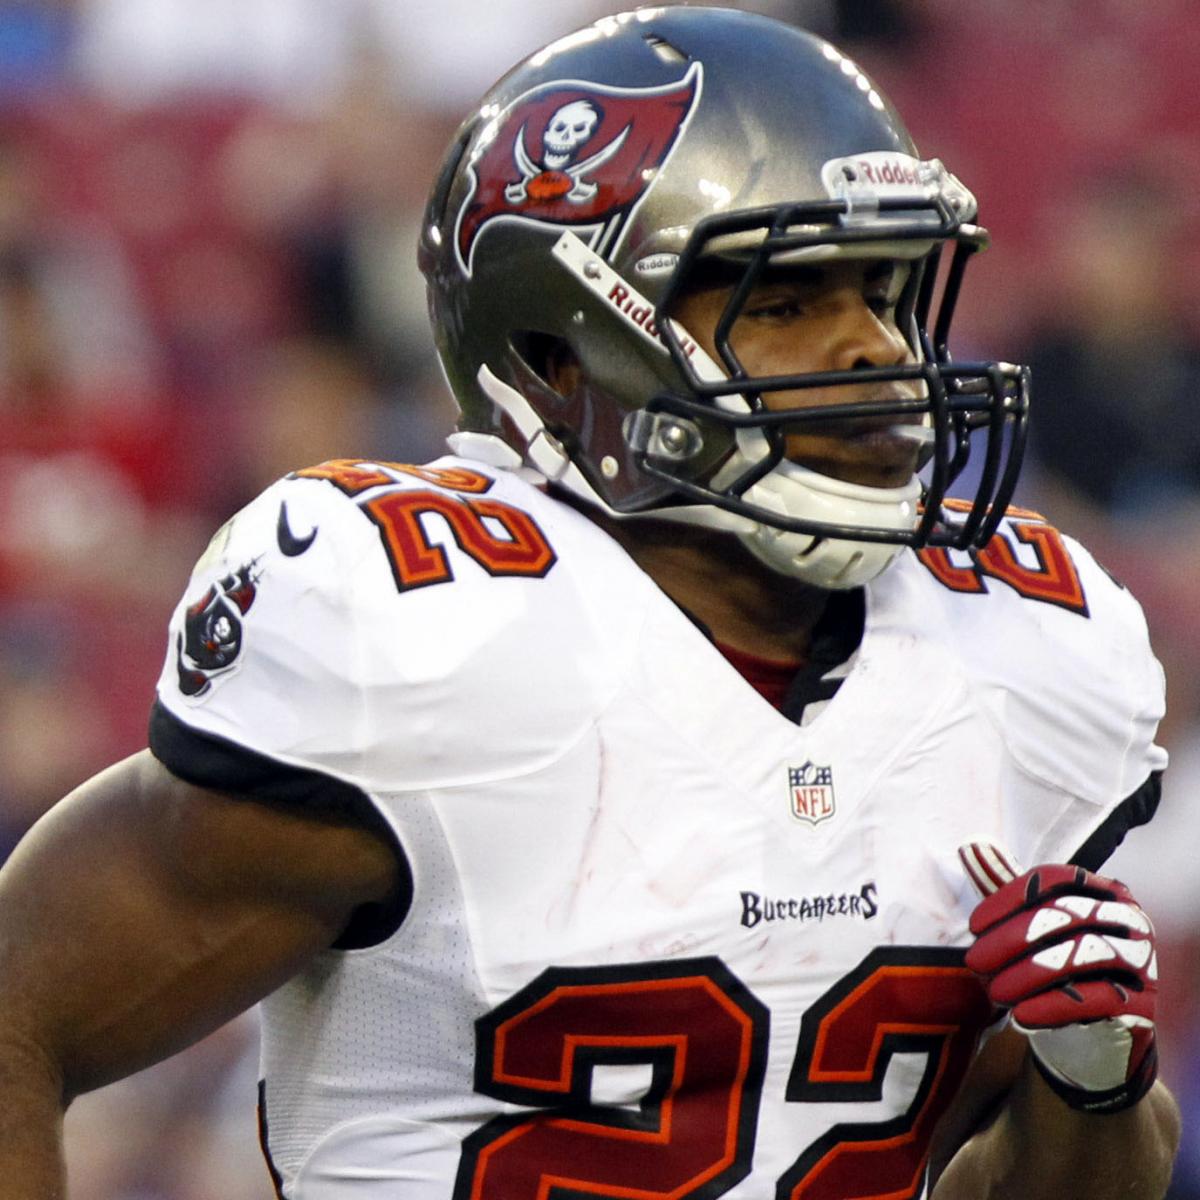 Tampa Bay Buccaneers Roster 2013: Latest Cuts, Depth Charts and